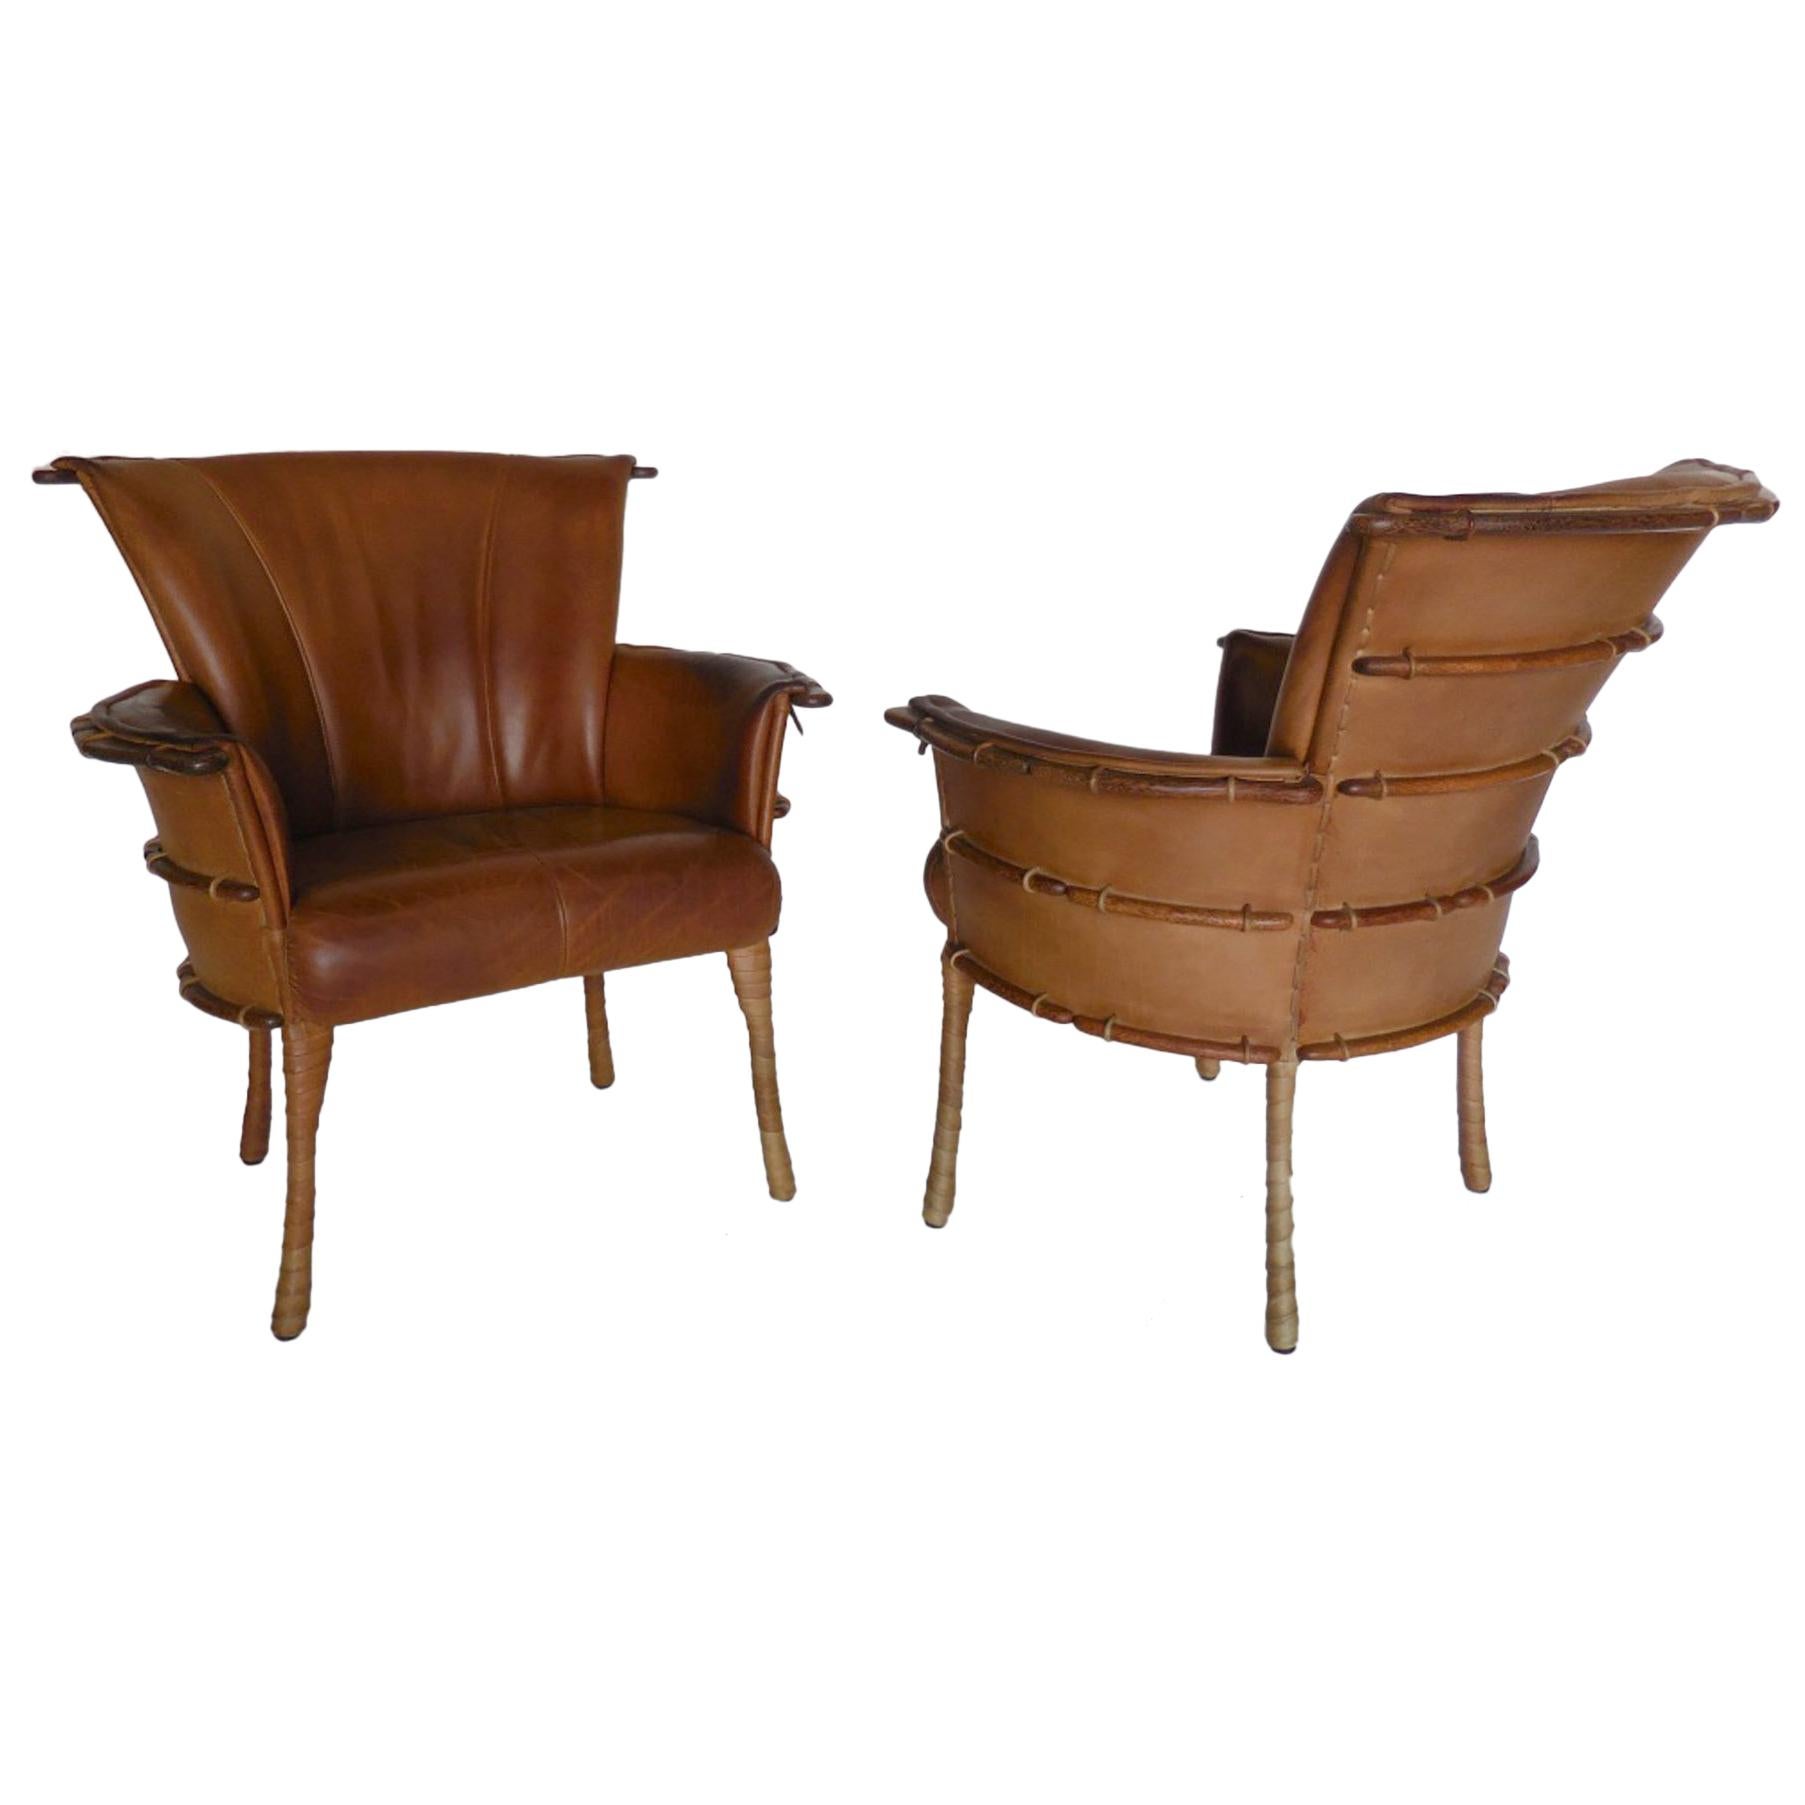 Pair of Leather and Palm Wood Club Chairs